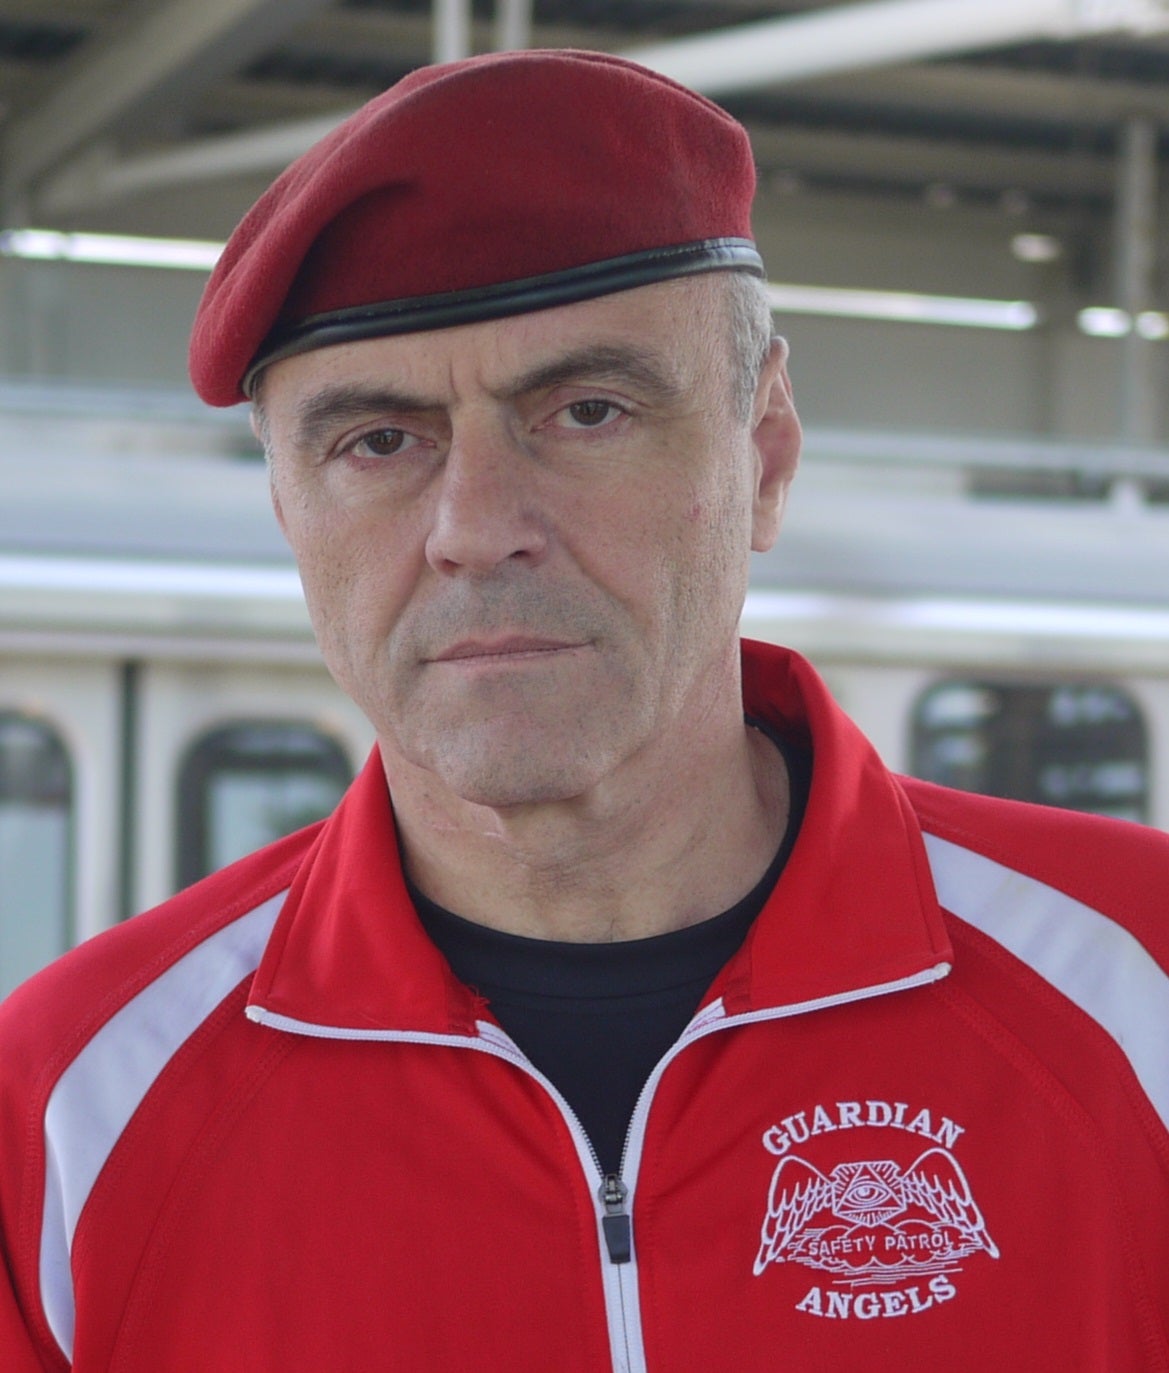 Curtis Sliwa, ‘Guardian Angels’ founder, wins GOP nomination in NYC mayoral race